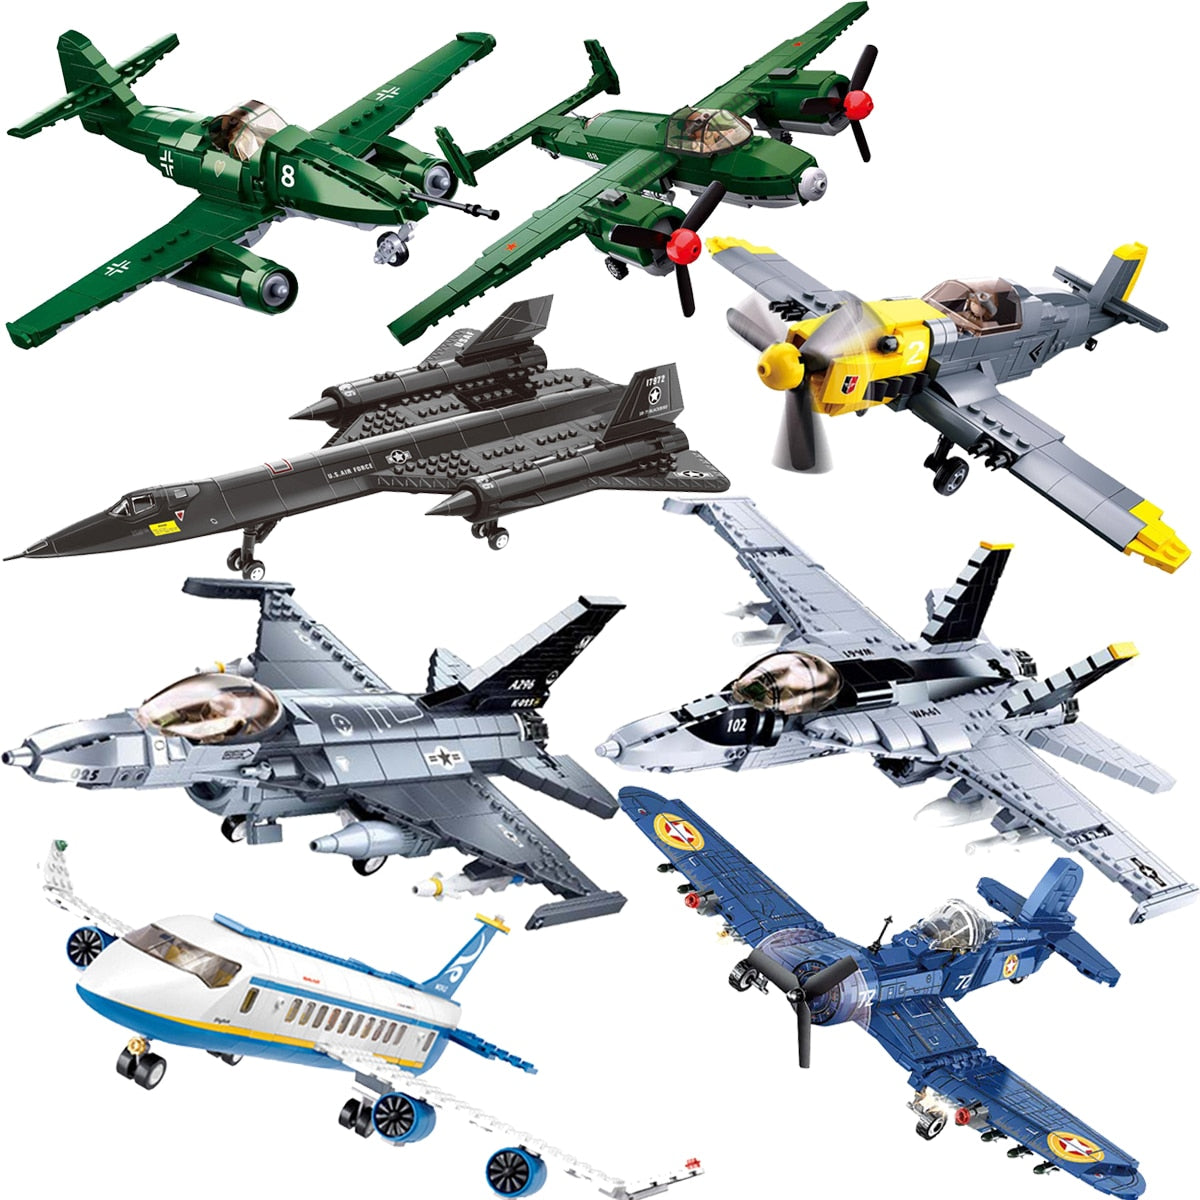 Military Aircraft Brick Model Collection - Classic to Modern Combat Aircraft Block Playsets